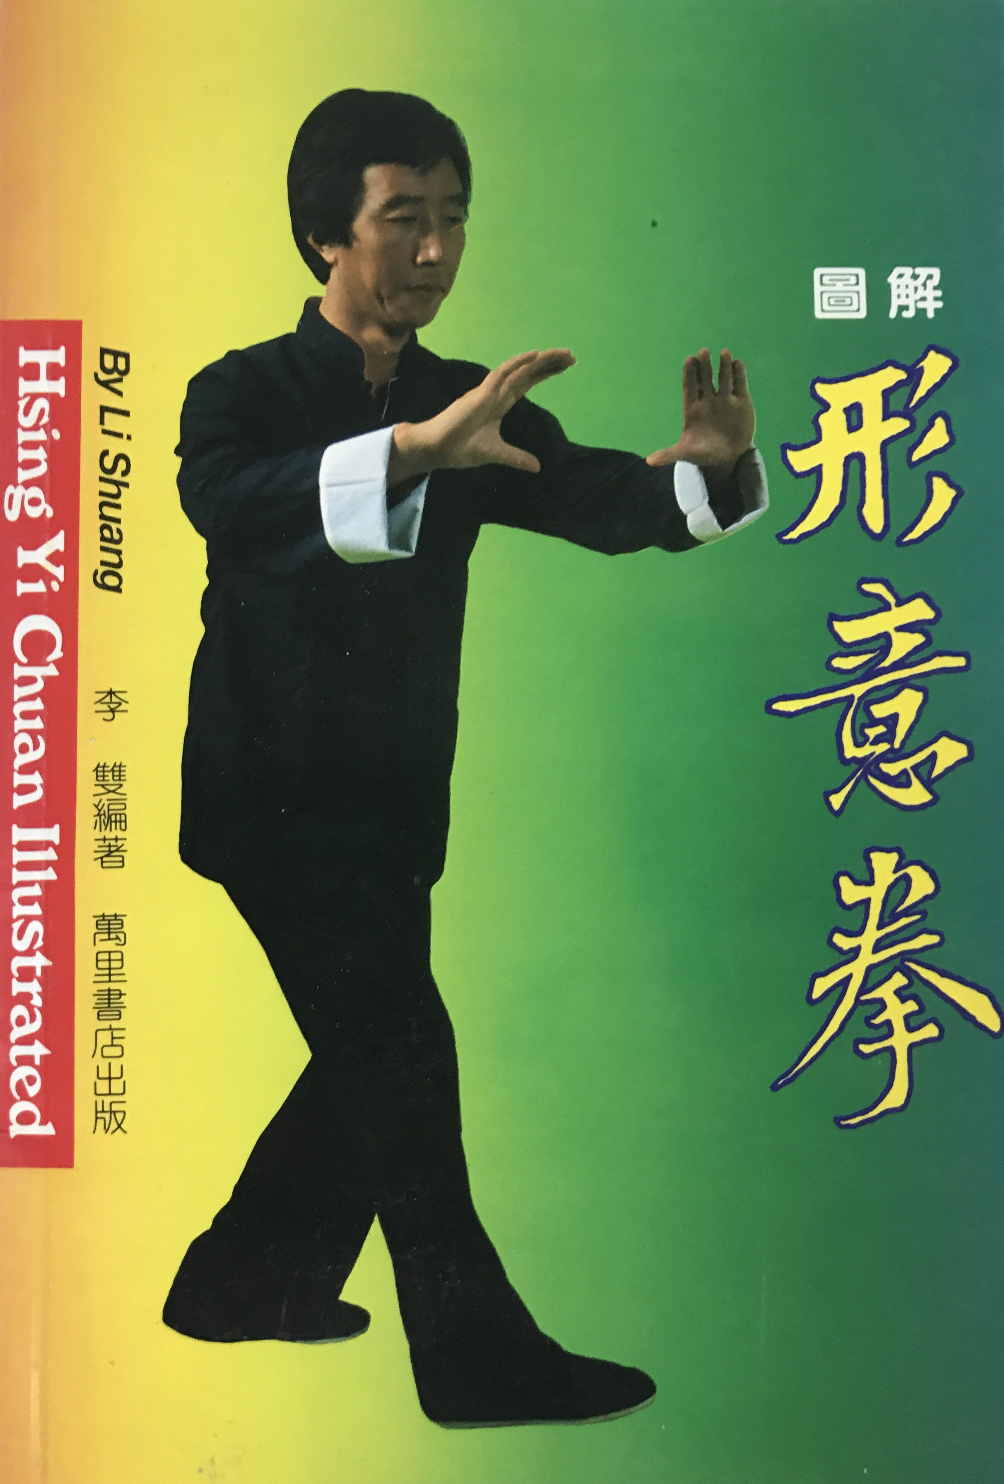 Hsing-I Chuan Kung Fu Illustrated Book by Li Shuang (Preowned) - Budovideos Inc